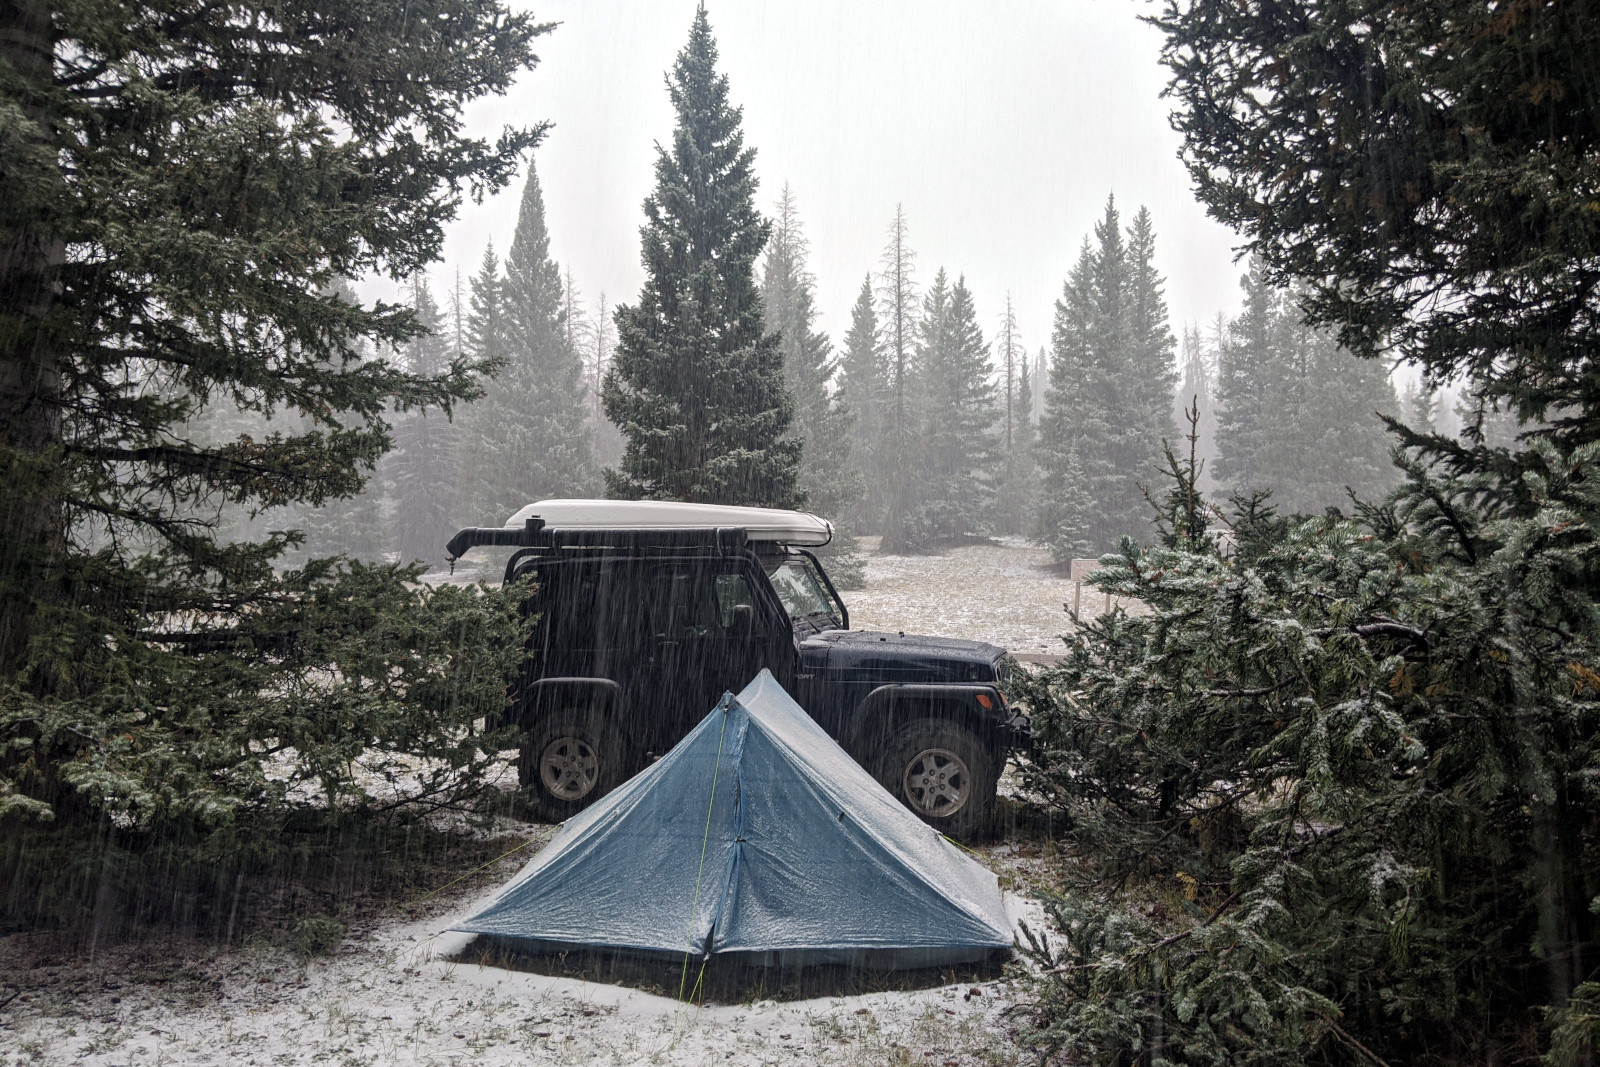 Snow beginning to fall on La Jeep and Dad's tent